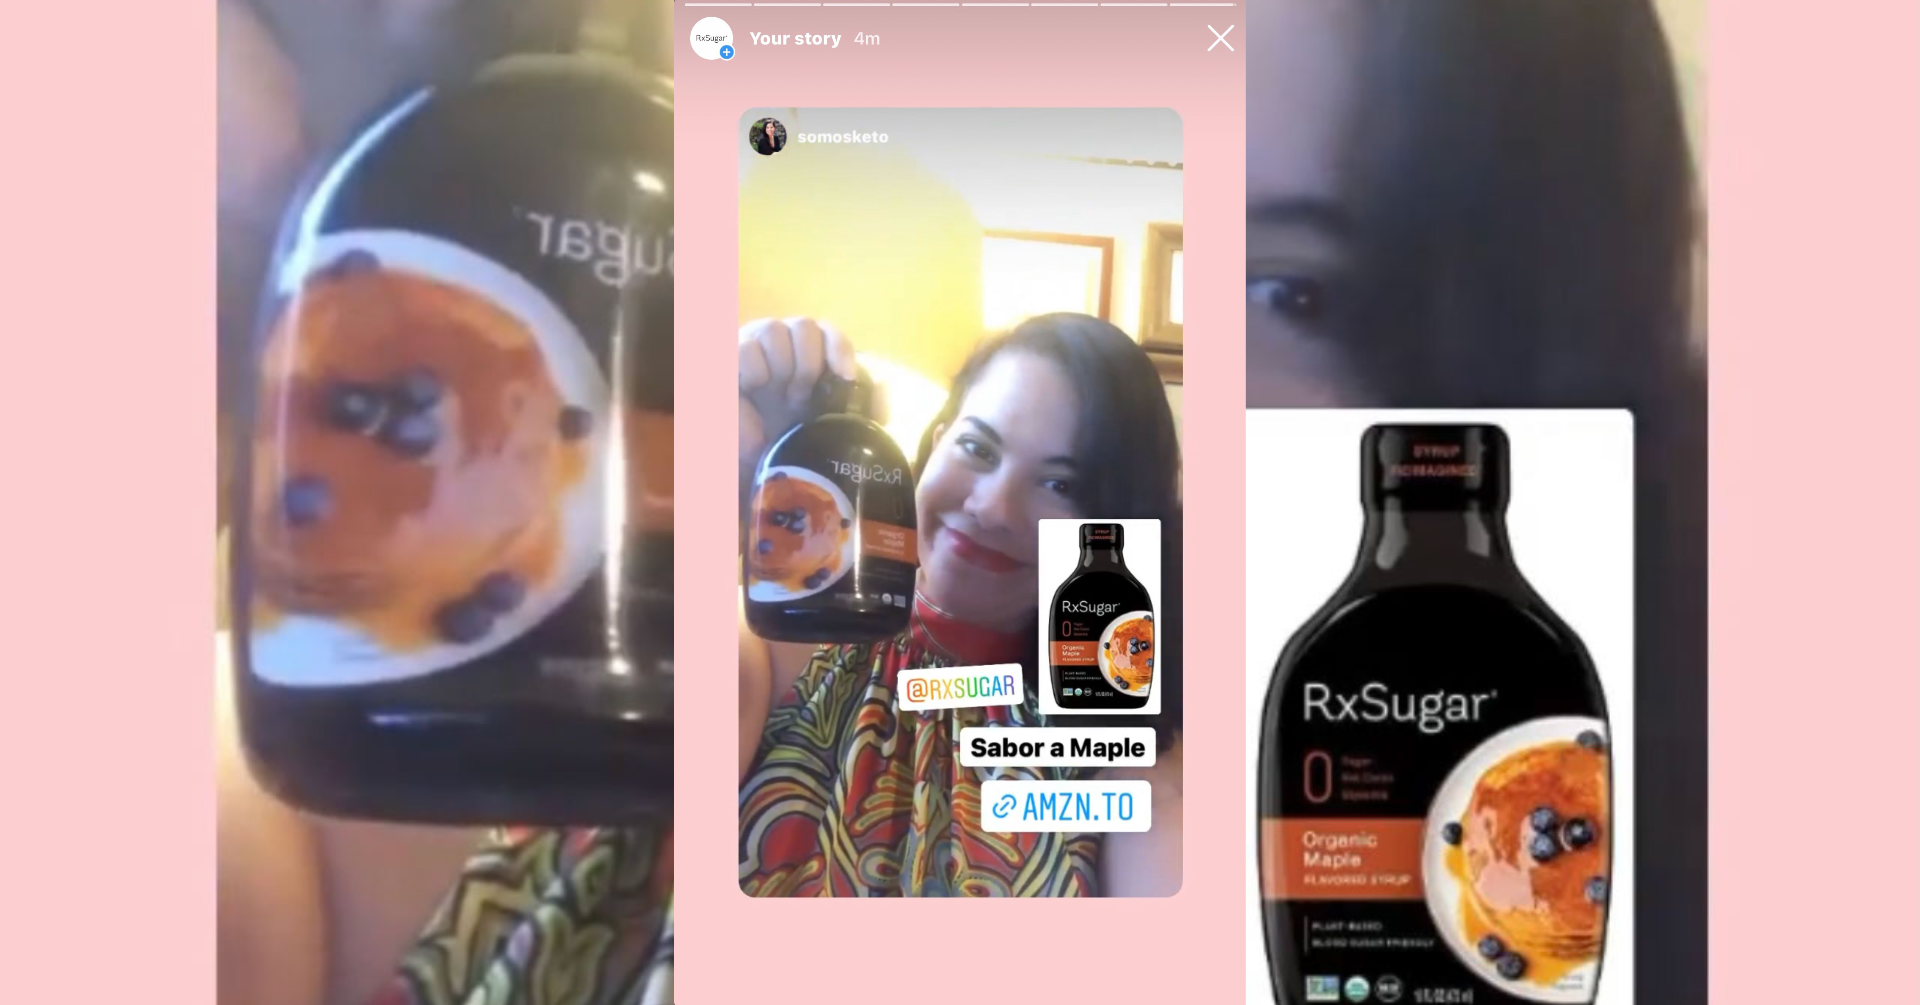 Somos Keto Hyping Up Her RxSugar Products